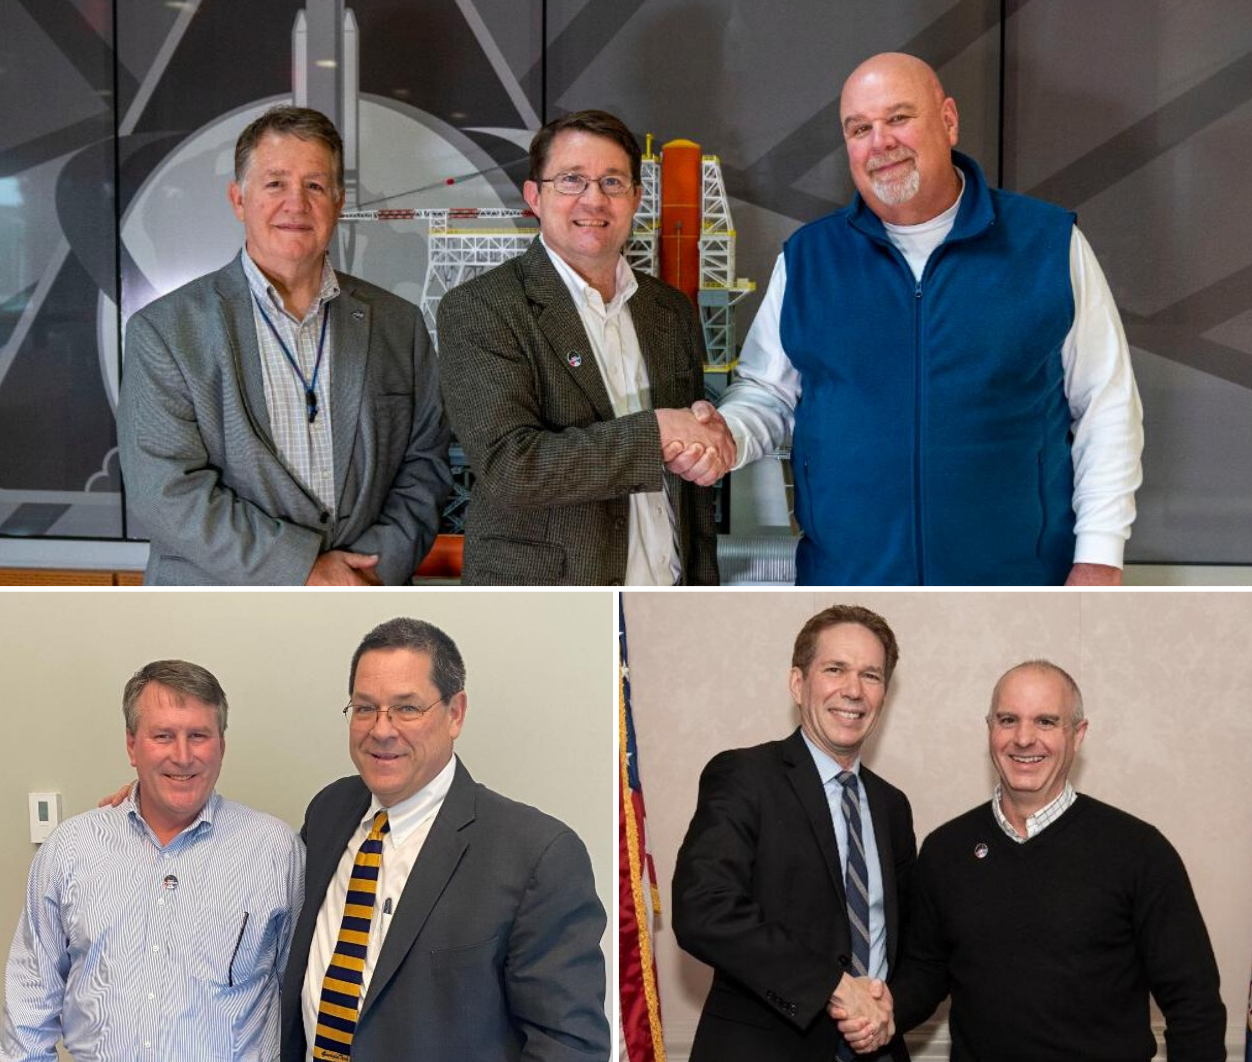 Three team members from NASA’s Marshall Space Flight Center are honored as HEO HErOs – a recognition from Douglas Loverro.